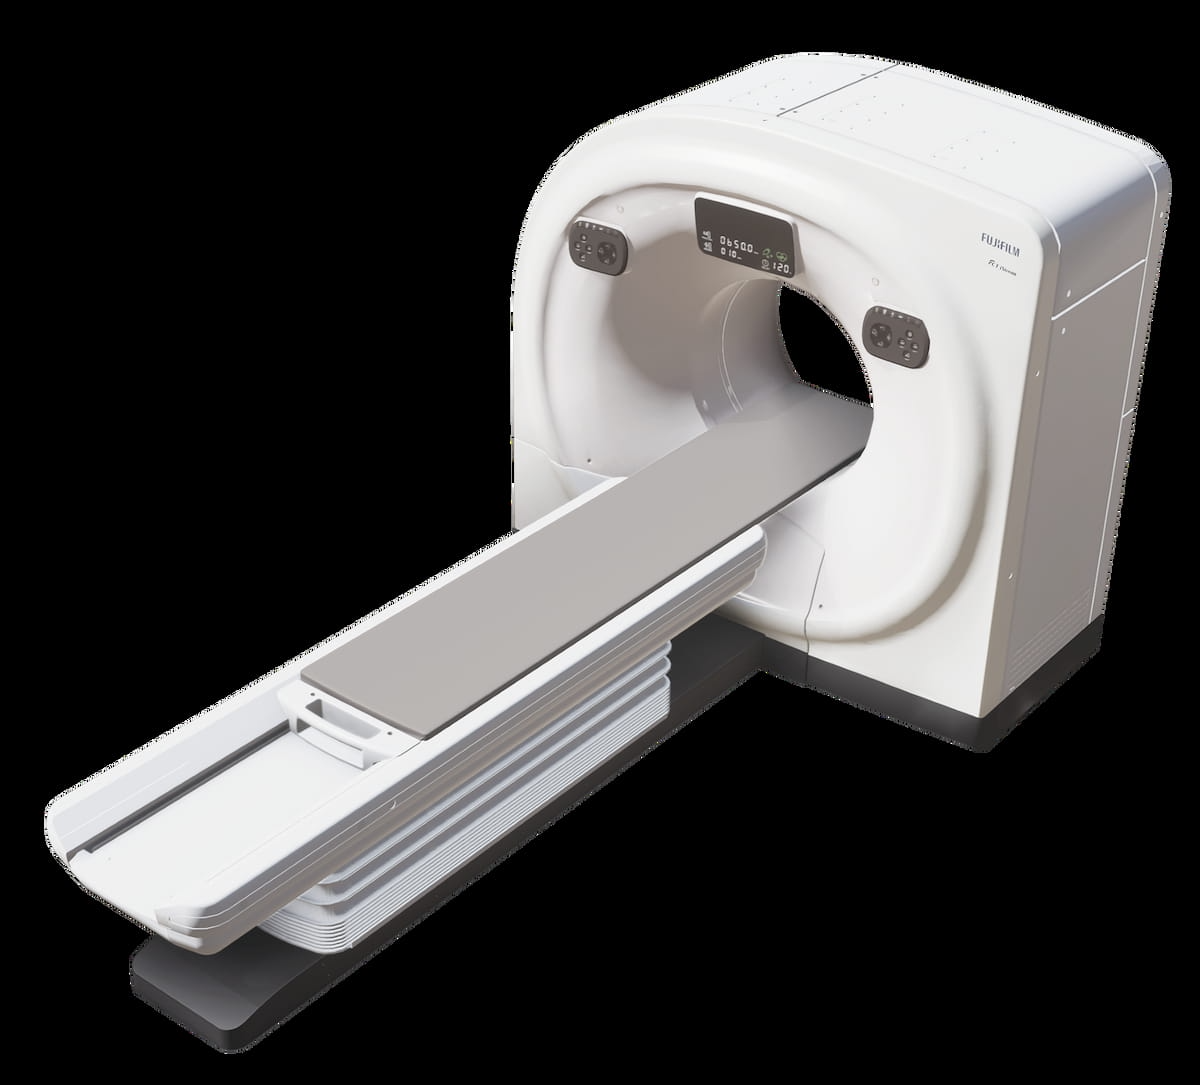 Through a combination of iterative progressive reconstruction and visual modeling (IPV), Fujifilm emphasized that the Intelli IPV feature in the newly FDA-cleared FCT iStream system (shown above) may provide up to an 83 percent reduction in radiation dosing and up to a 90 percent noise reduction. (Image courtesy of Fujifilm.)